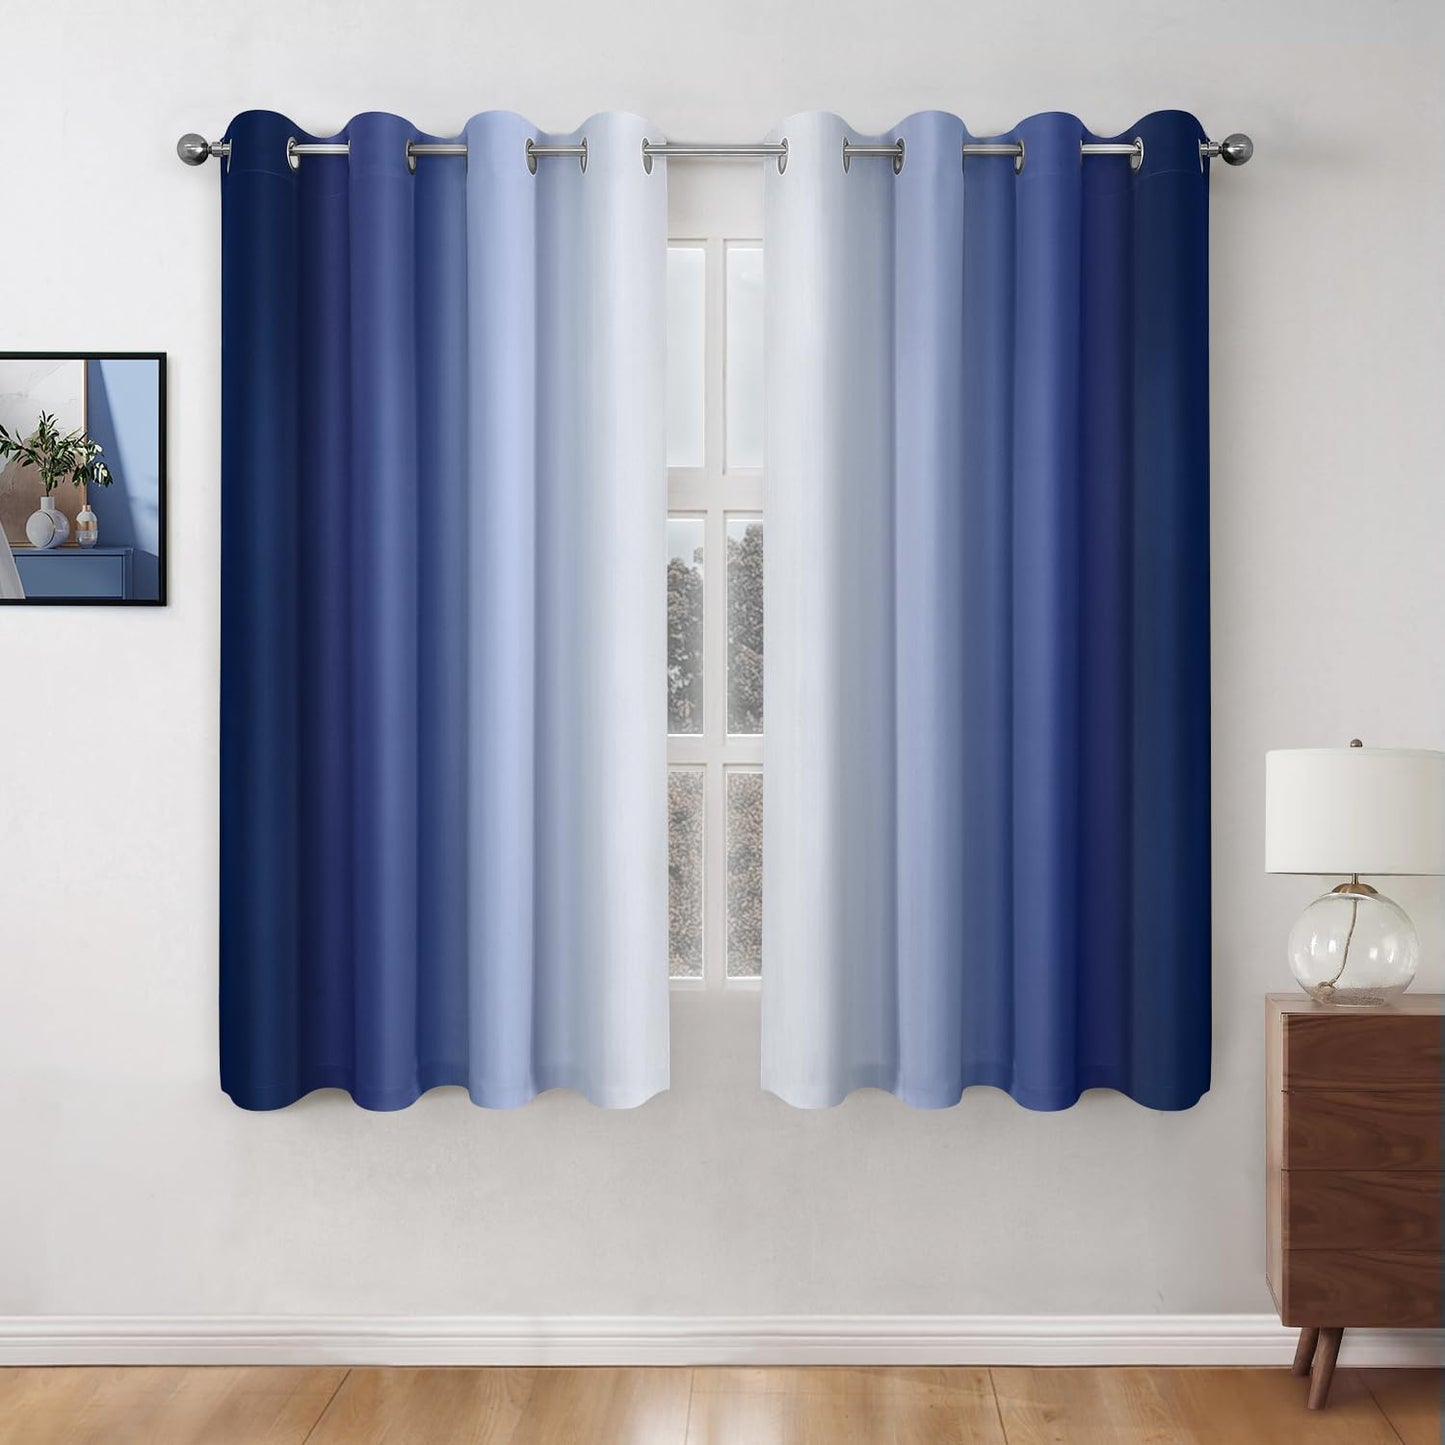 HOMEIDEAS Navy Blue Ombre Blackout Curtains 52 X 84 Inch Length Gradient Room Darkening Thermal Insulated Energy Saving Grommet 2 Panels Window Drapes for Living Room/Bedroom  HOMEIDEAS Navy Blue 1 52"W X 63"L 